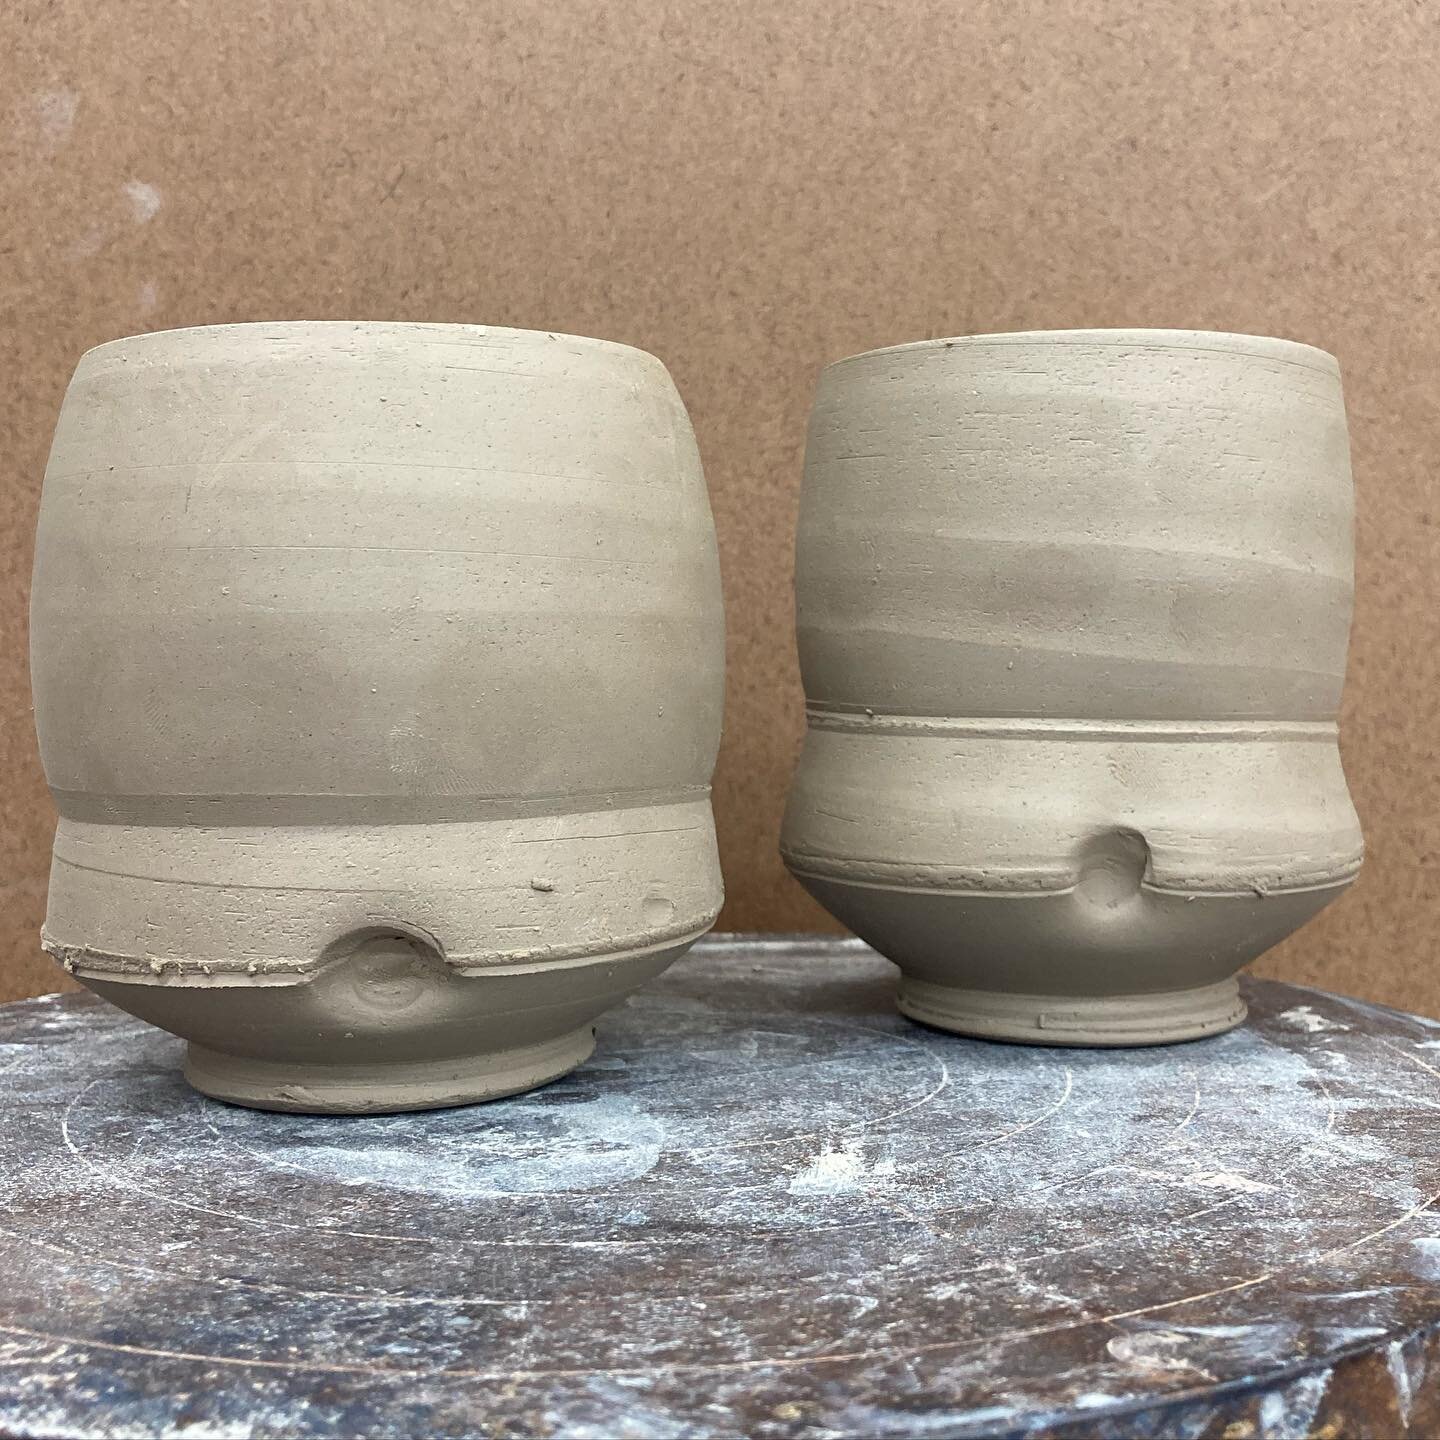 I was without power in my studio since Sunday (now back), so I had a chance to make some cups. It&rsquo;s nice to sit down, clear my head, and just think about form ever once in a while. #pots #utilitarian #clay #ceramics #pottery